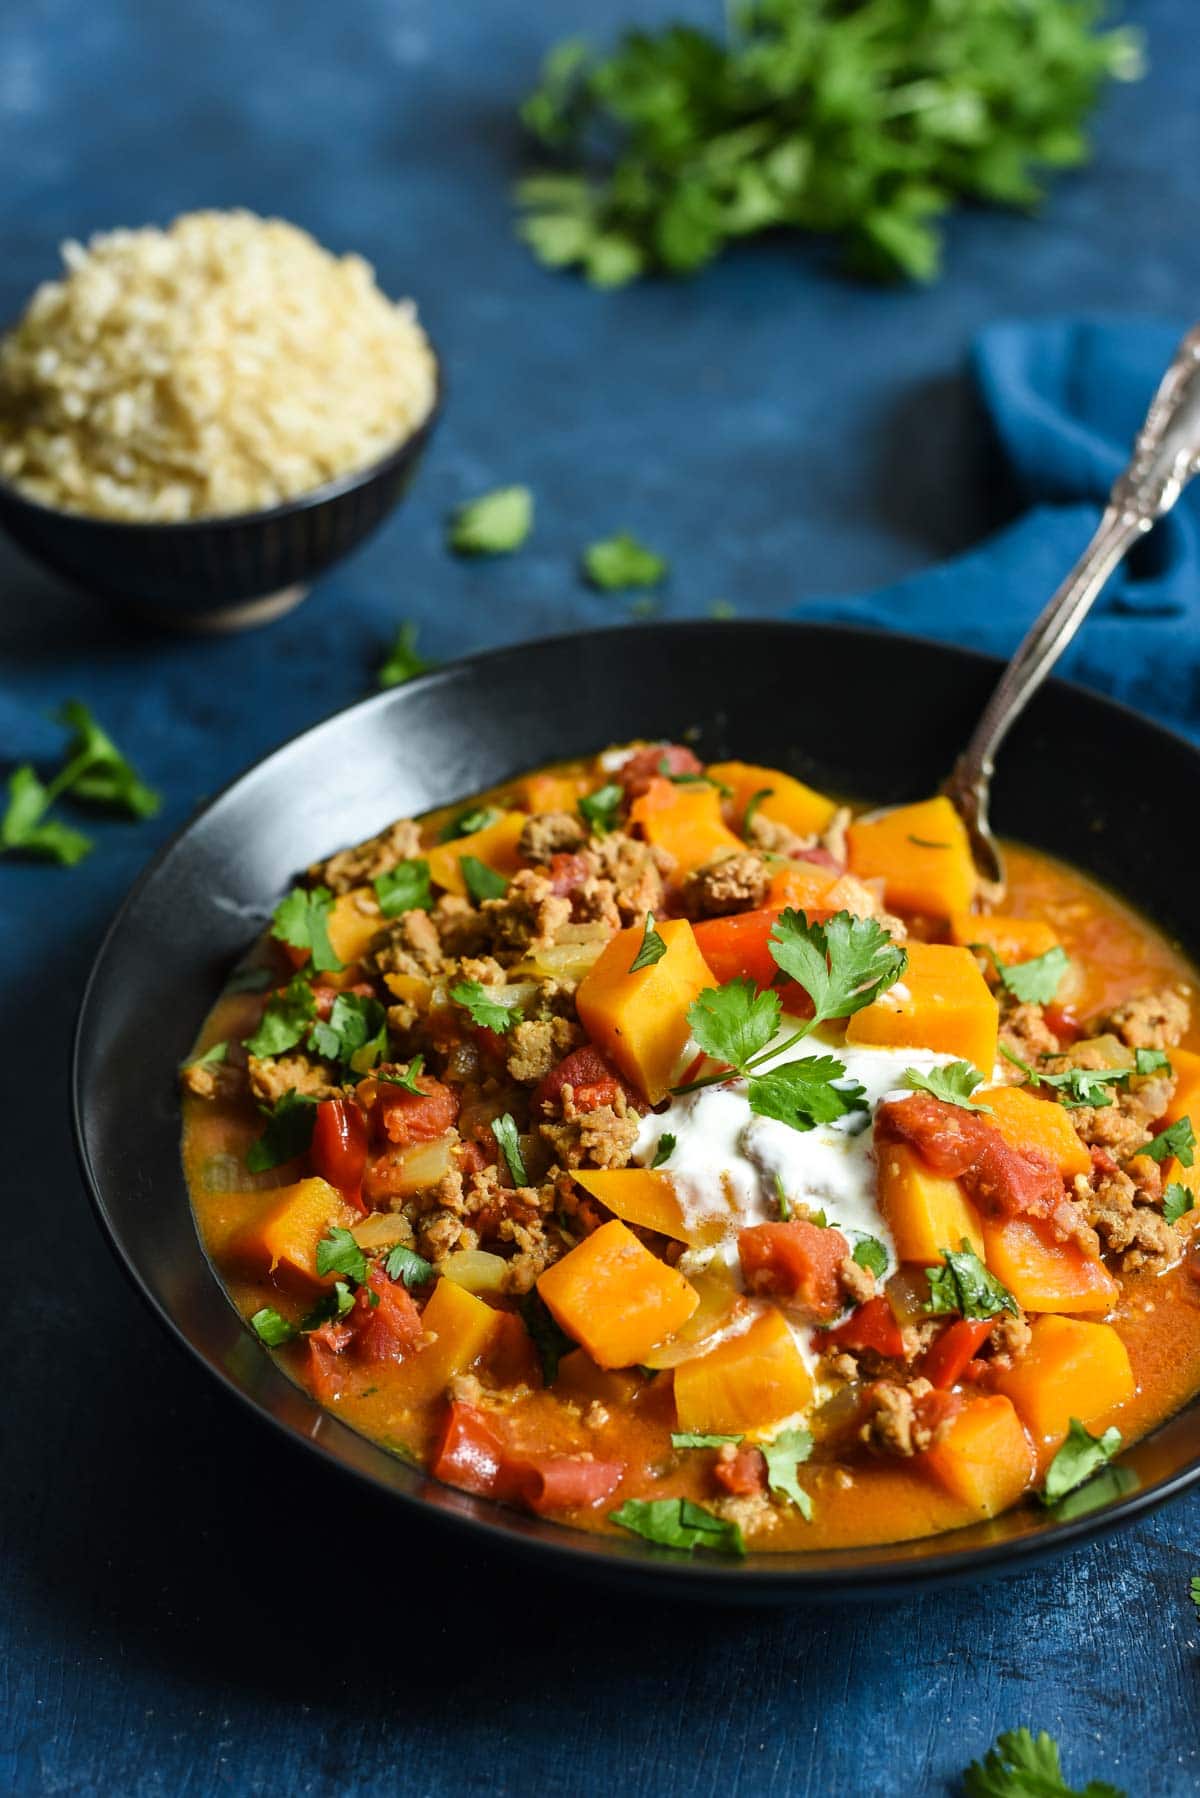 This Turkey and Butternut Squash Curry is a healthy, comforting one pot meal that's packed with flavor.